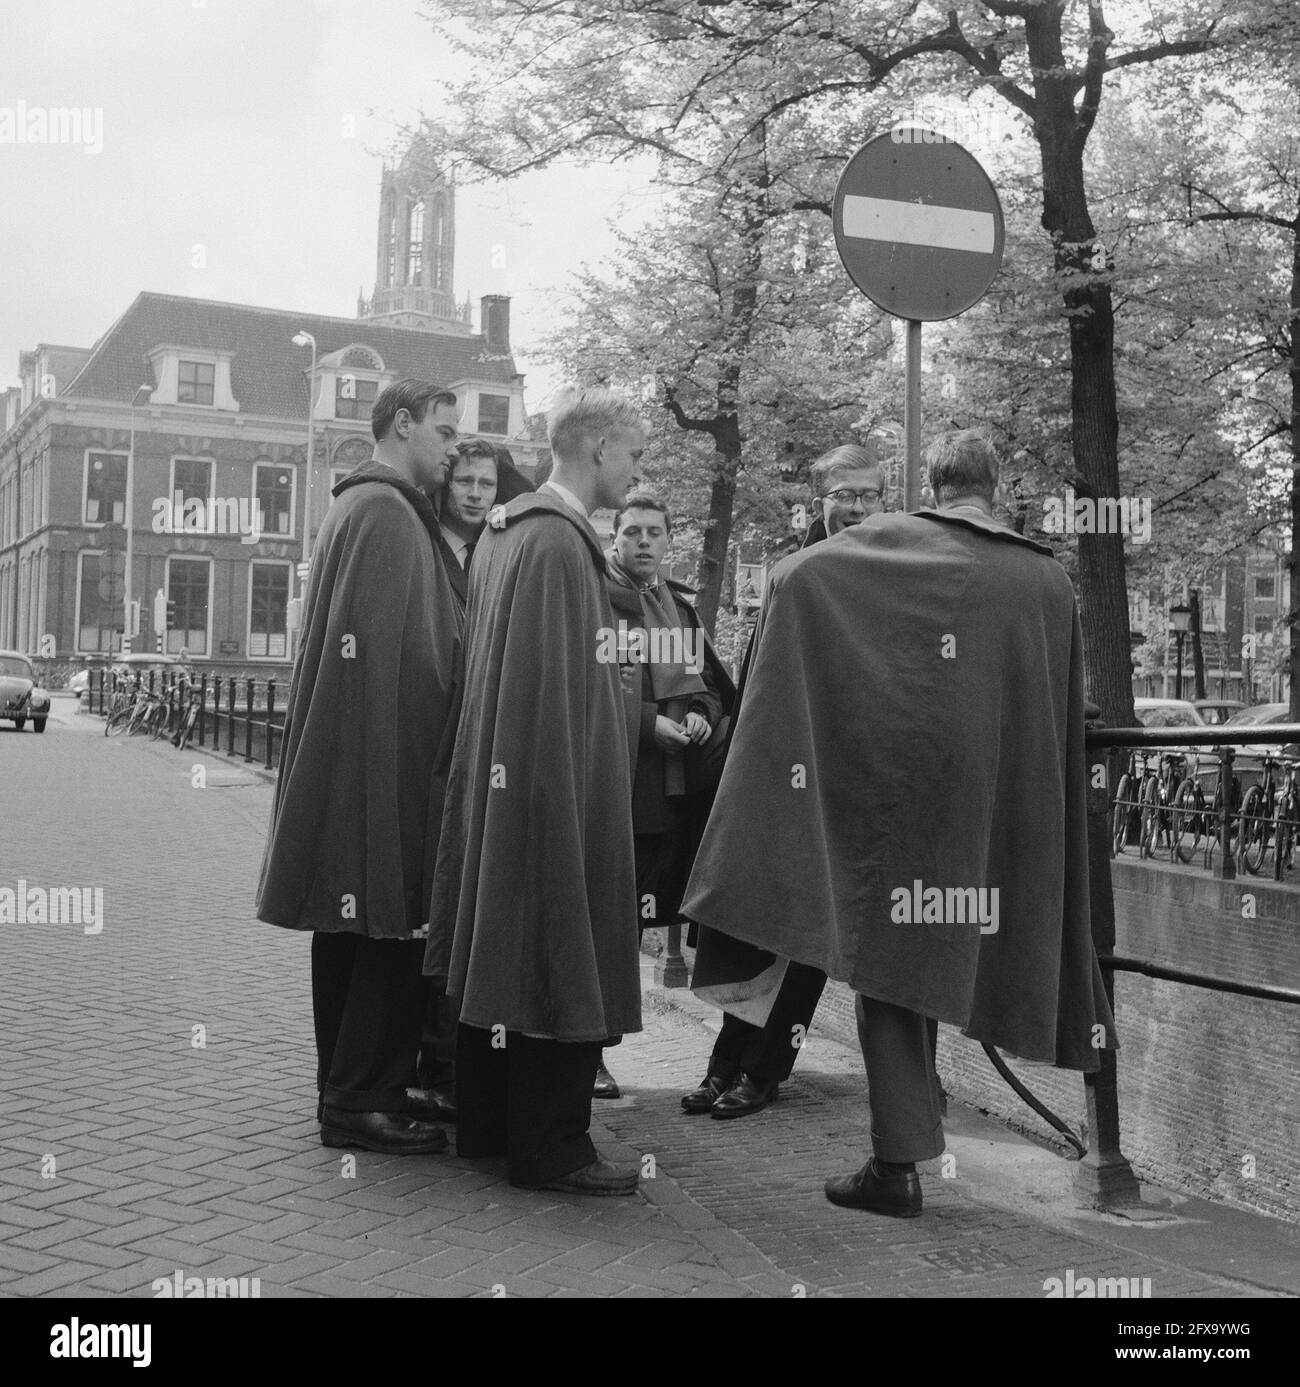 Capes for students in Utrecht in connection with 325th anniversary of the corps, 5 May 1961, corps, students, The Netherlands, 20th century press agency photo, news to remember, documentary, historic photography 1945-1990, visual stories, human history of the Twentieth Century, capturing moments in time Stock Photo